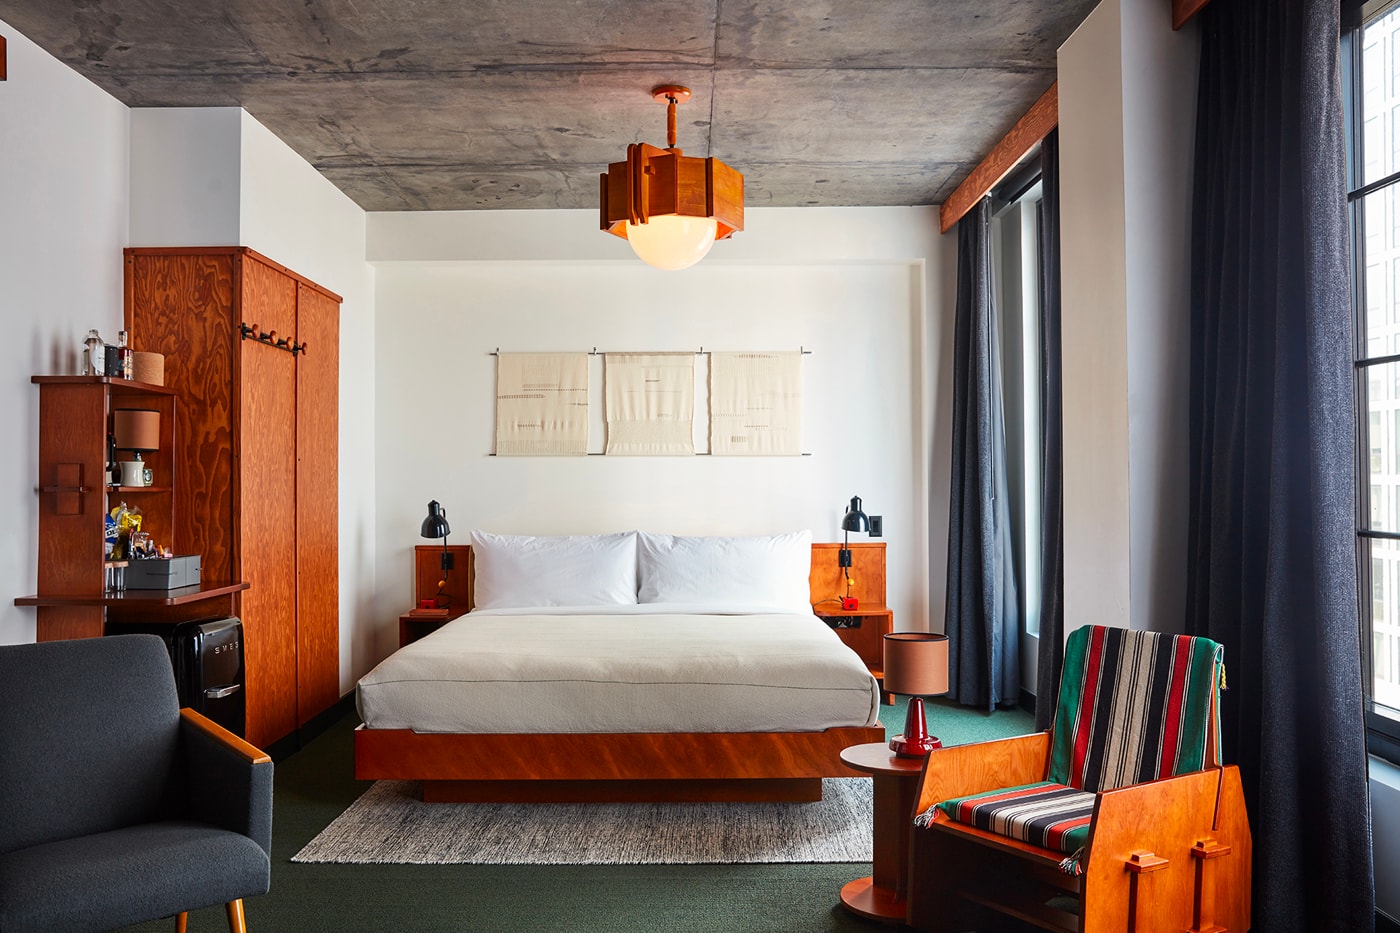 Ace Hotel Brooklyn Officially Open New York City Travel Design Best Hip Reservation le Corbusier barclays center botanic garden staycation vaycation workation getaway boreum hill news